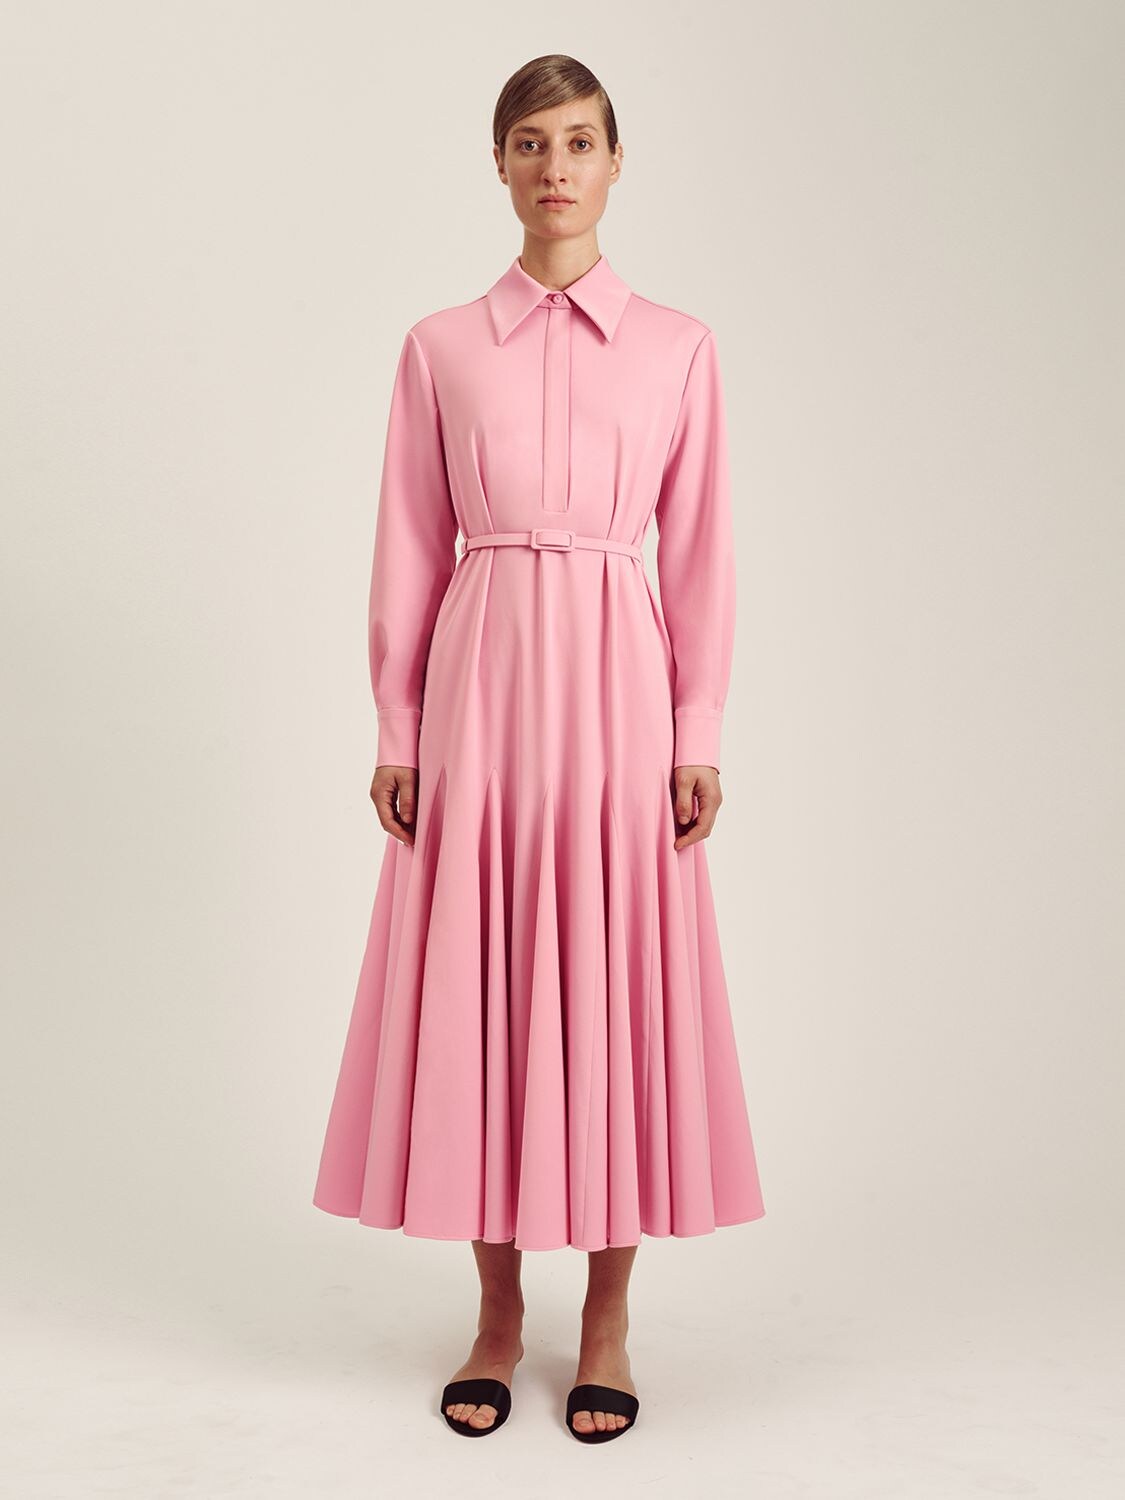 Emilia Wickstead Marion Stretch Cady Shirt Dress In Pink